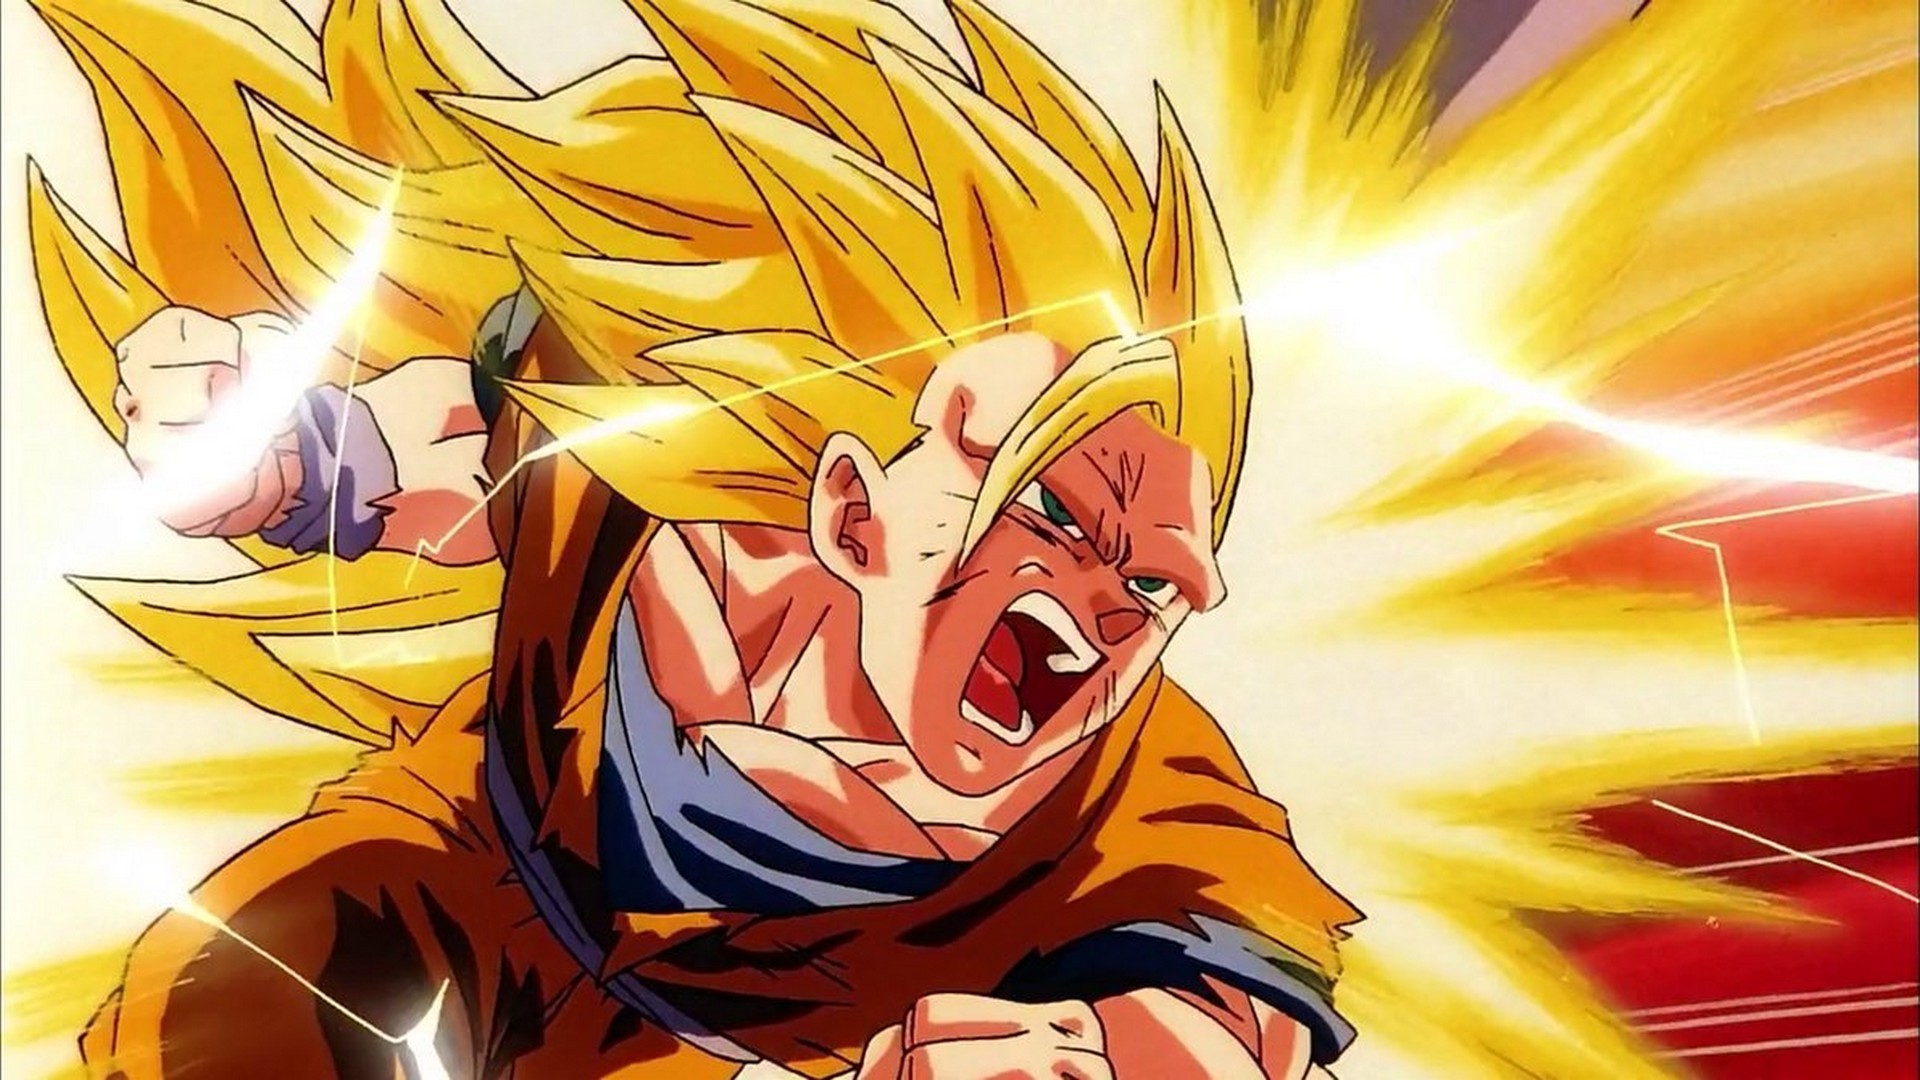 1920x1080 Wallpapers Goku SSJ3 with image resolution  pixel. You can make  this wallpaper for your